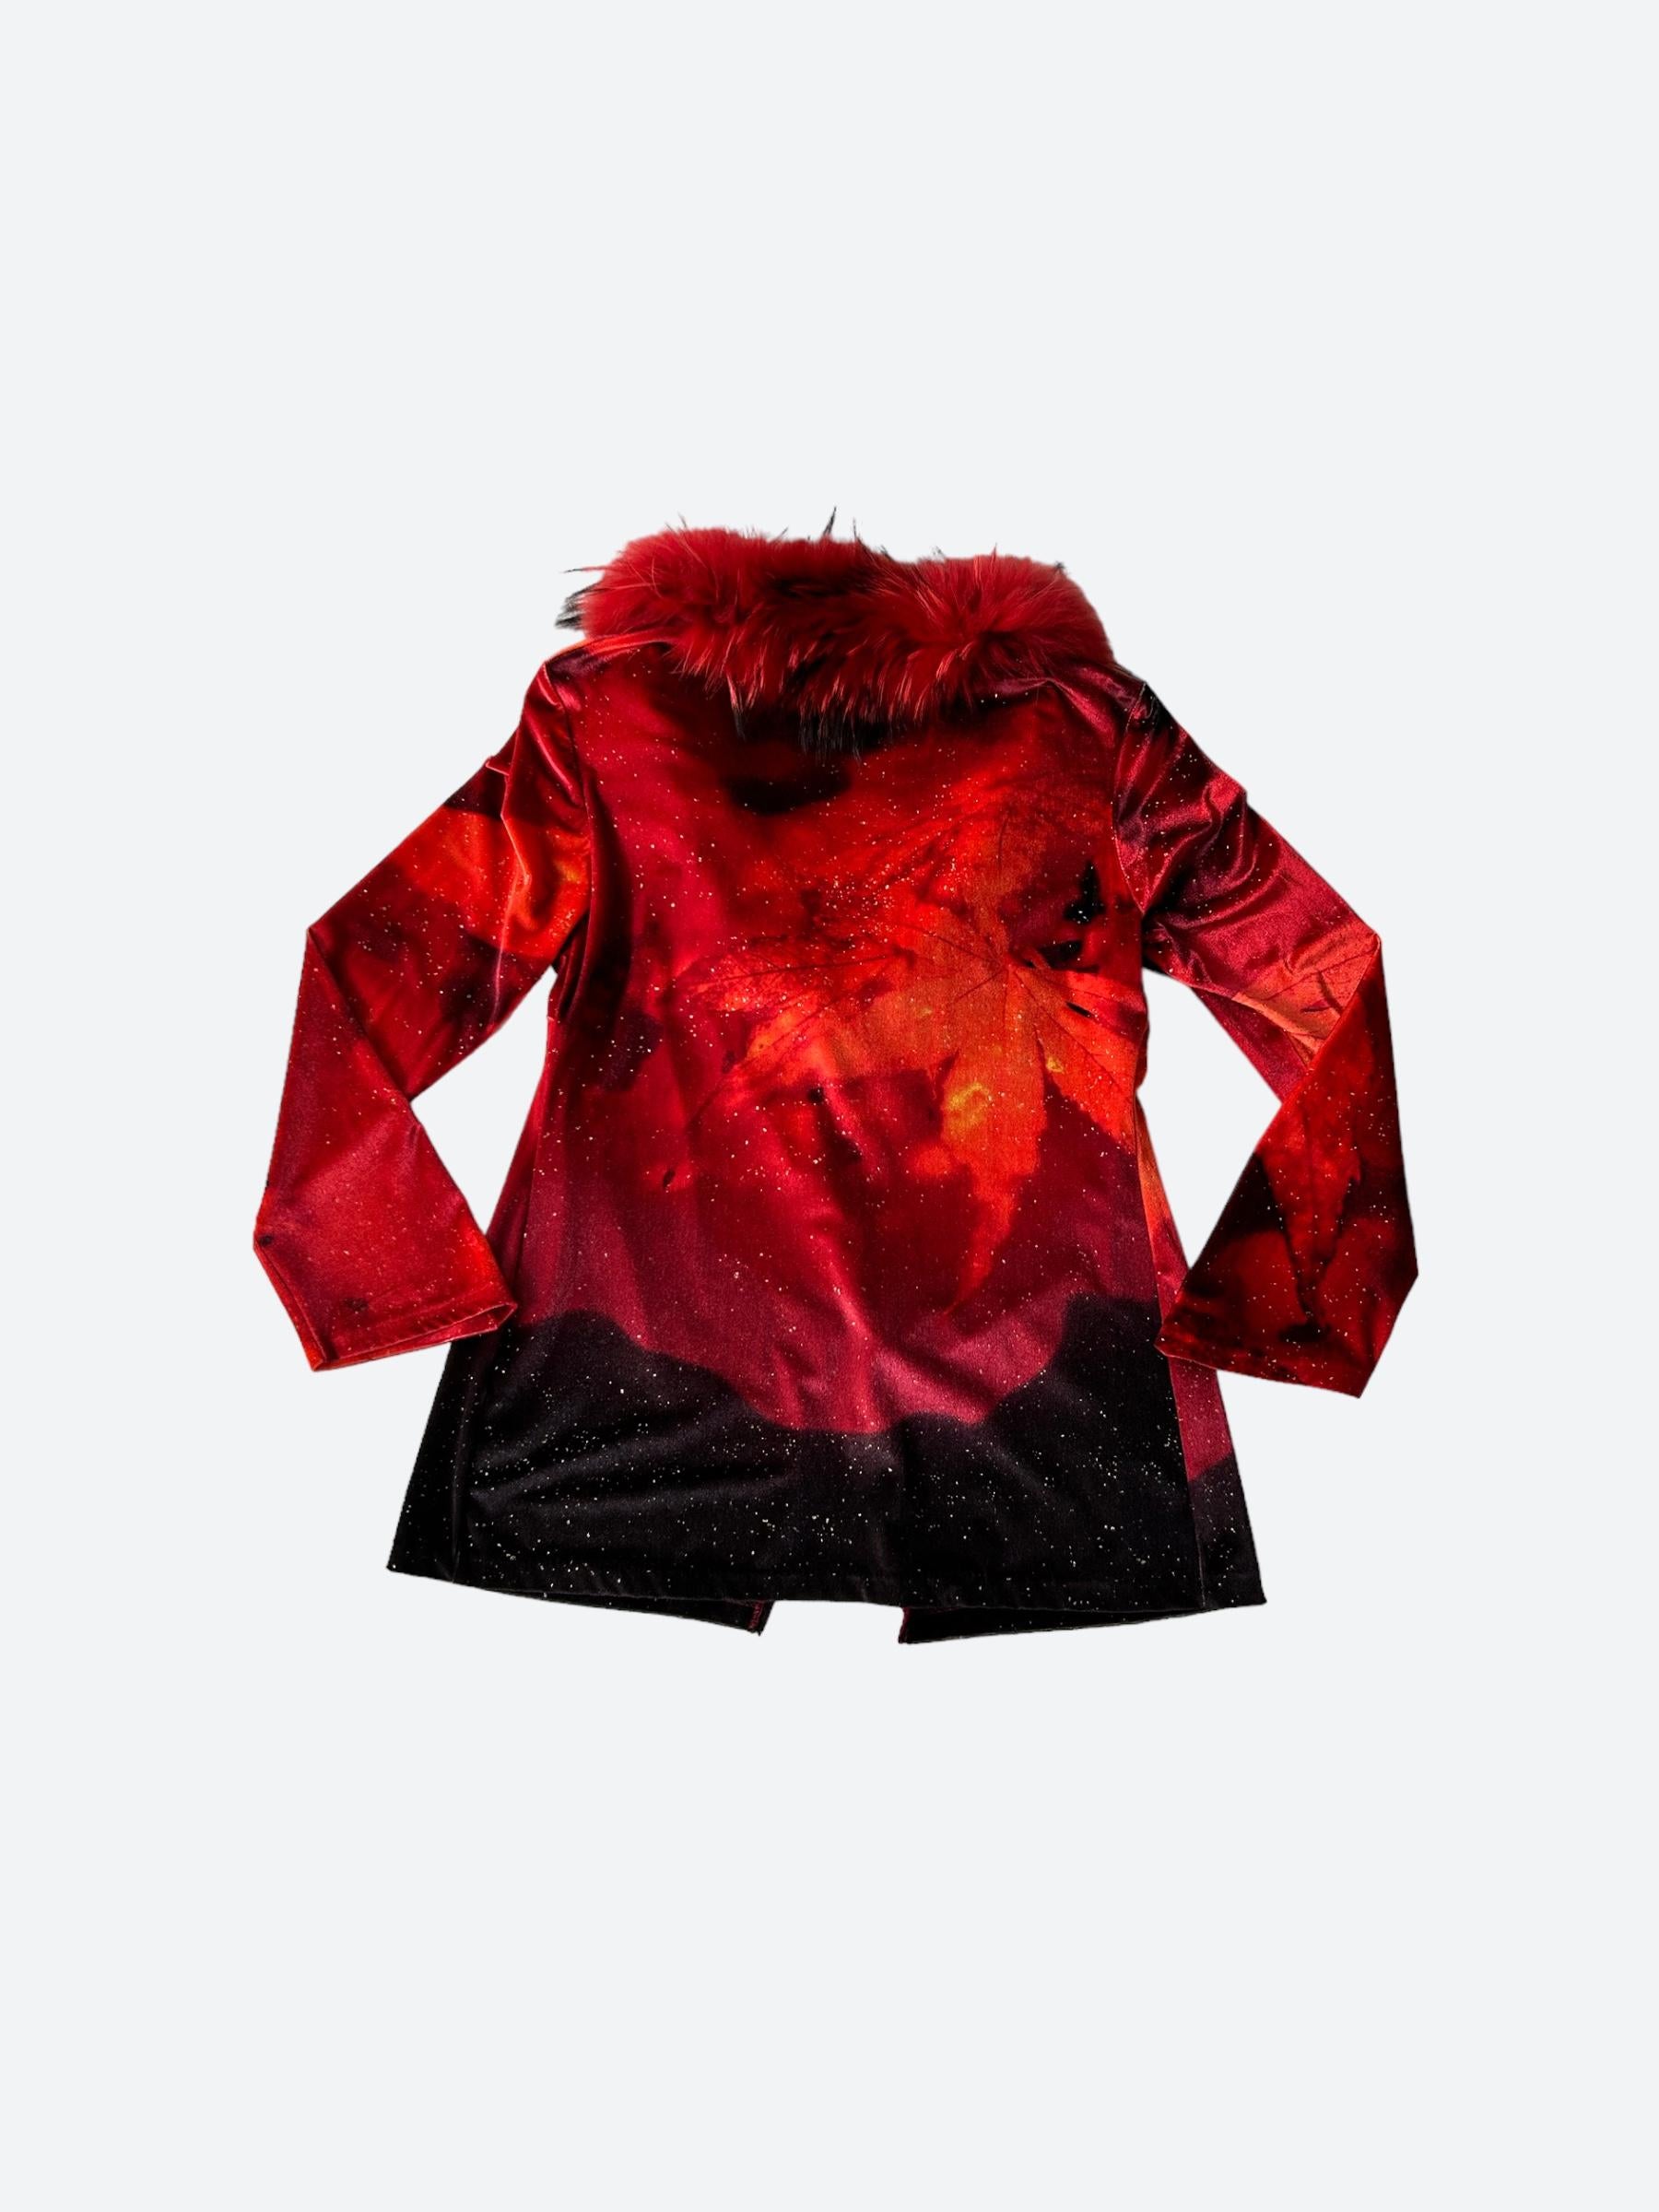 The placement of the leaf print motif on this cardigan in striking red and black monochrome colors gives this item a bold look, one enhanced by a subtle, golden speckled effect printed all over. 

This rare late 90s velvet and fur item is from the